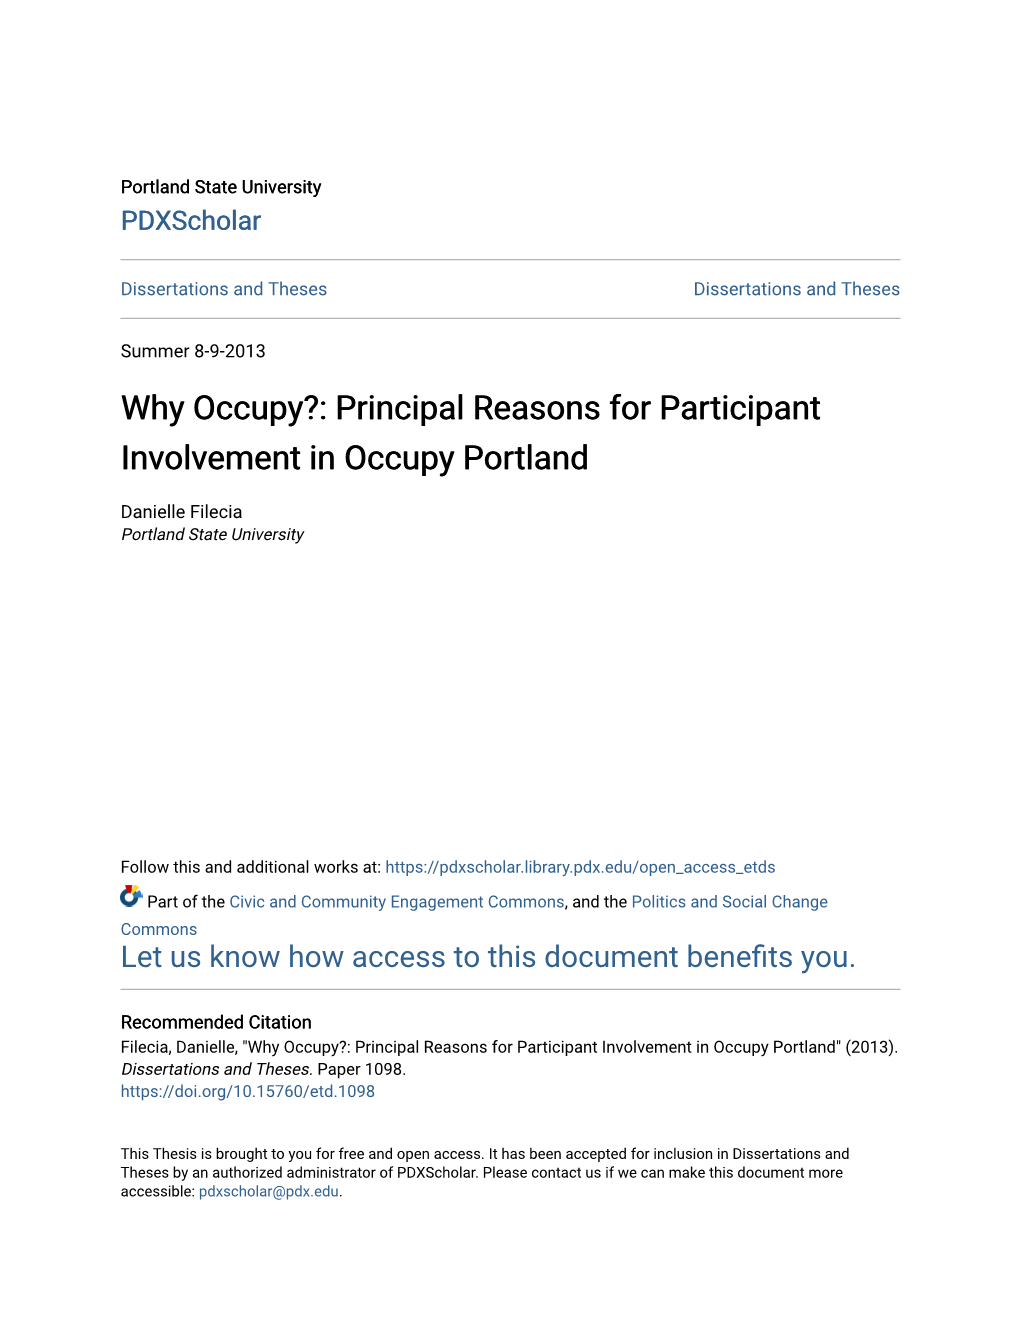 Why Occupy?: Principal Reasons for Participant Involvement in Occupy Portland